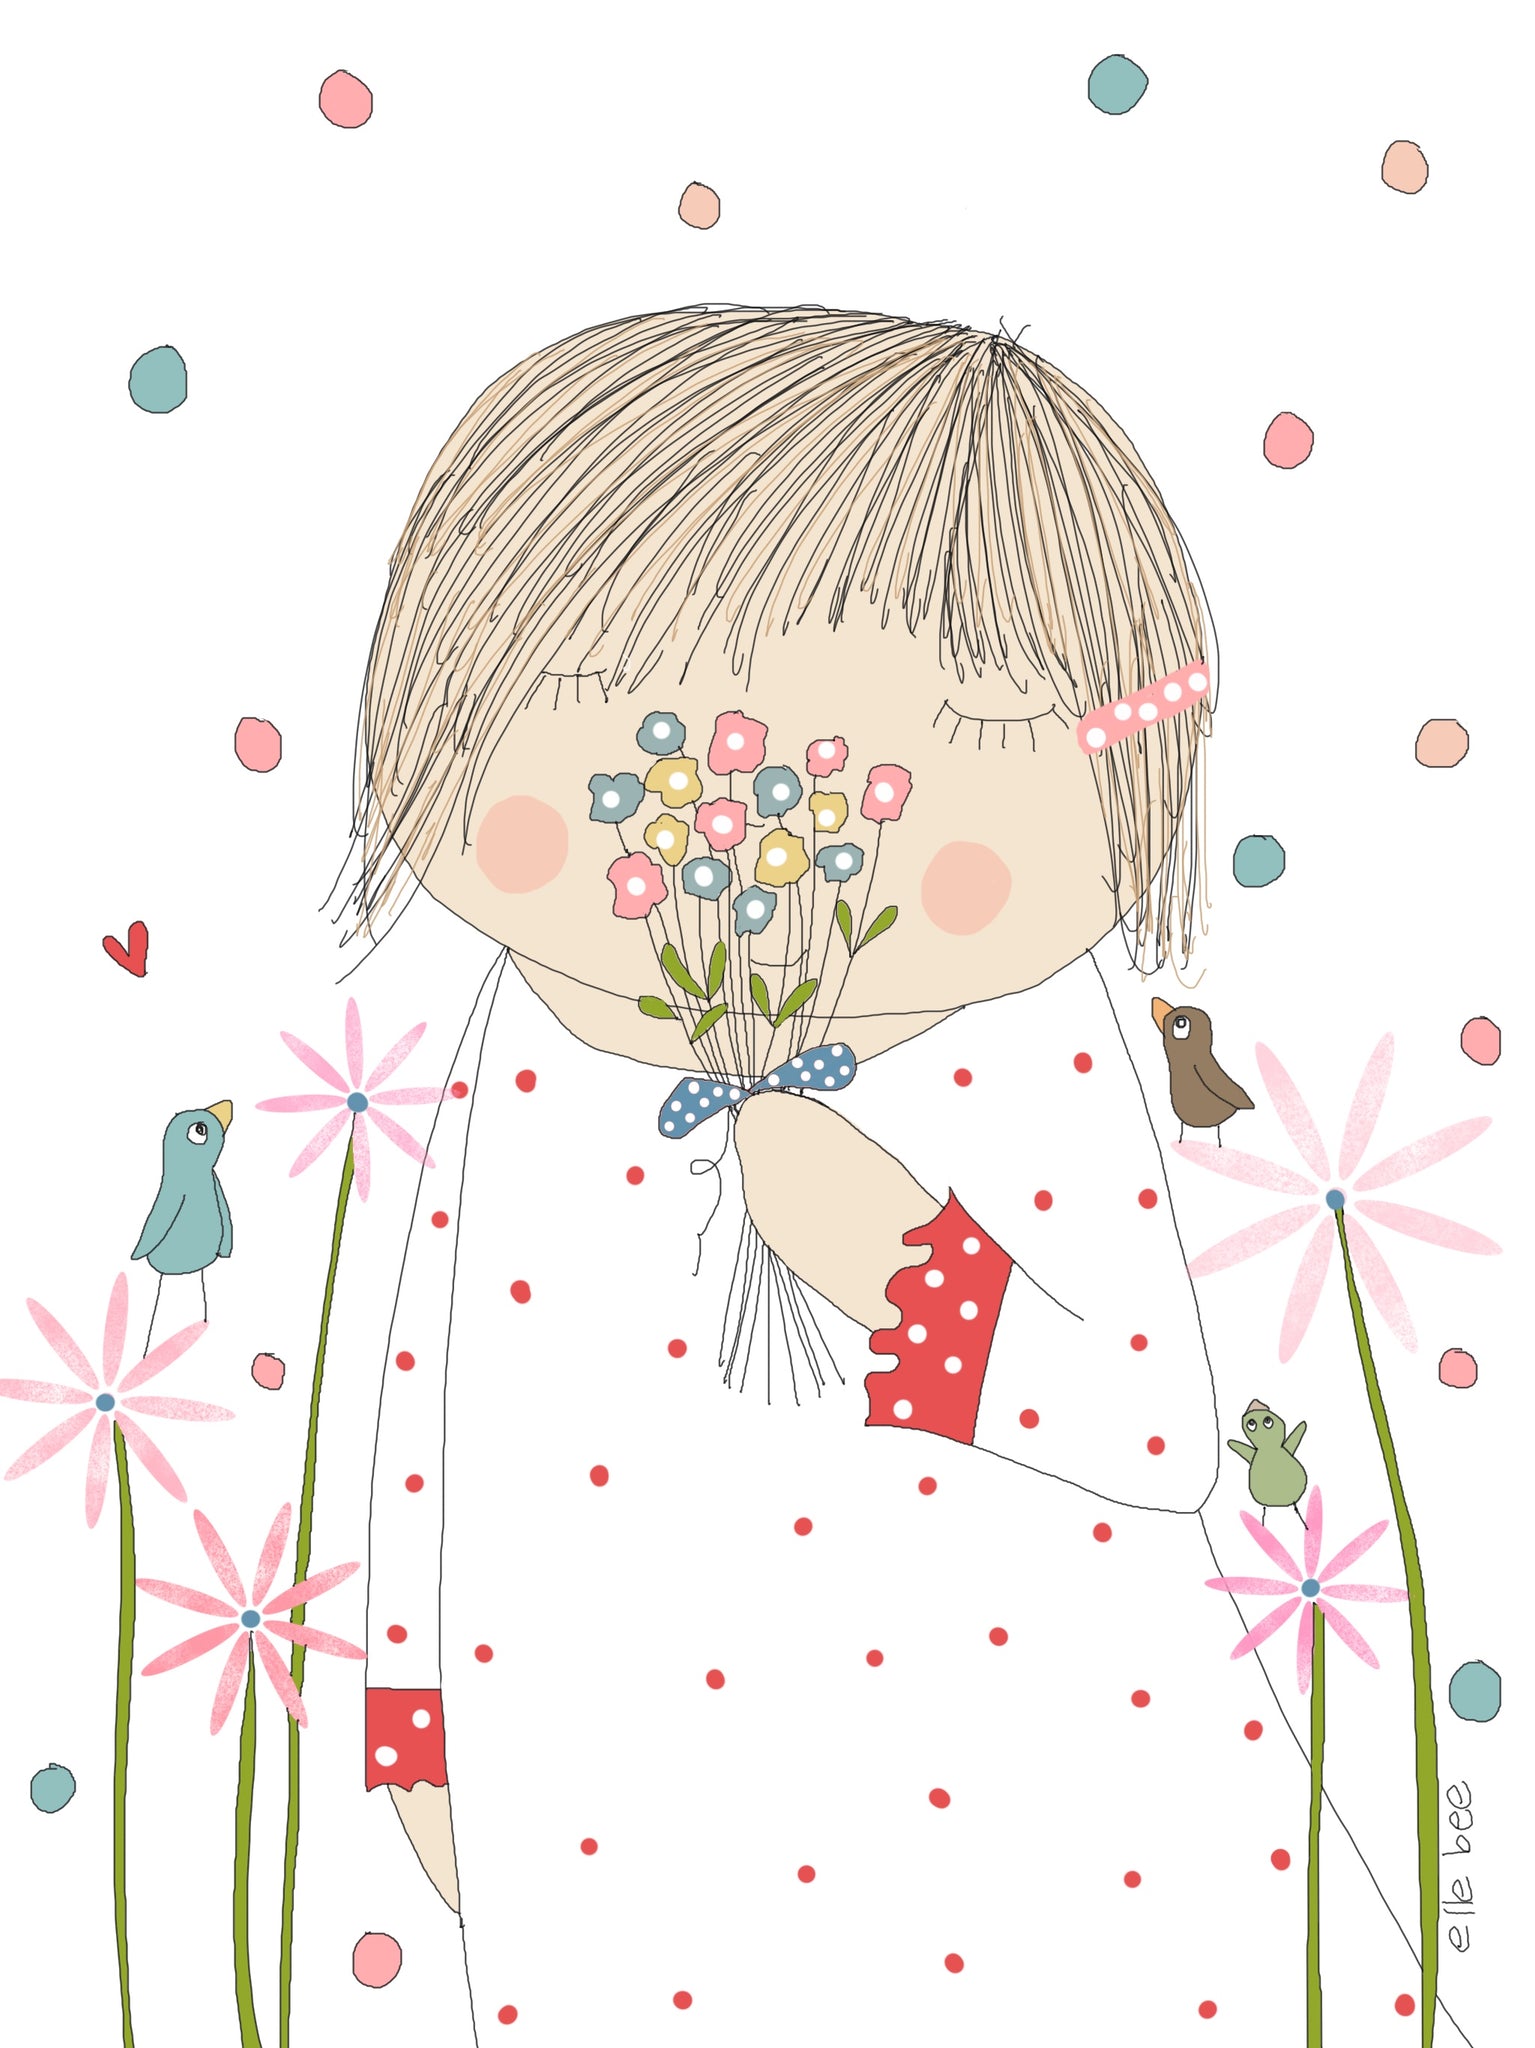 Stop & smell the flowers (dots) greeting card